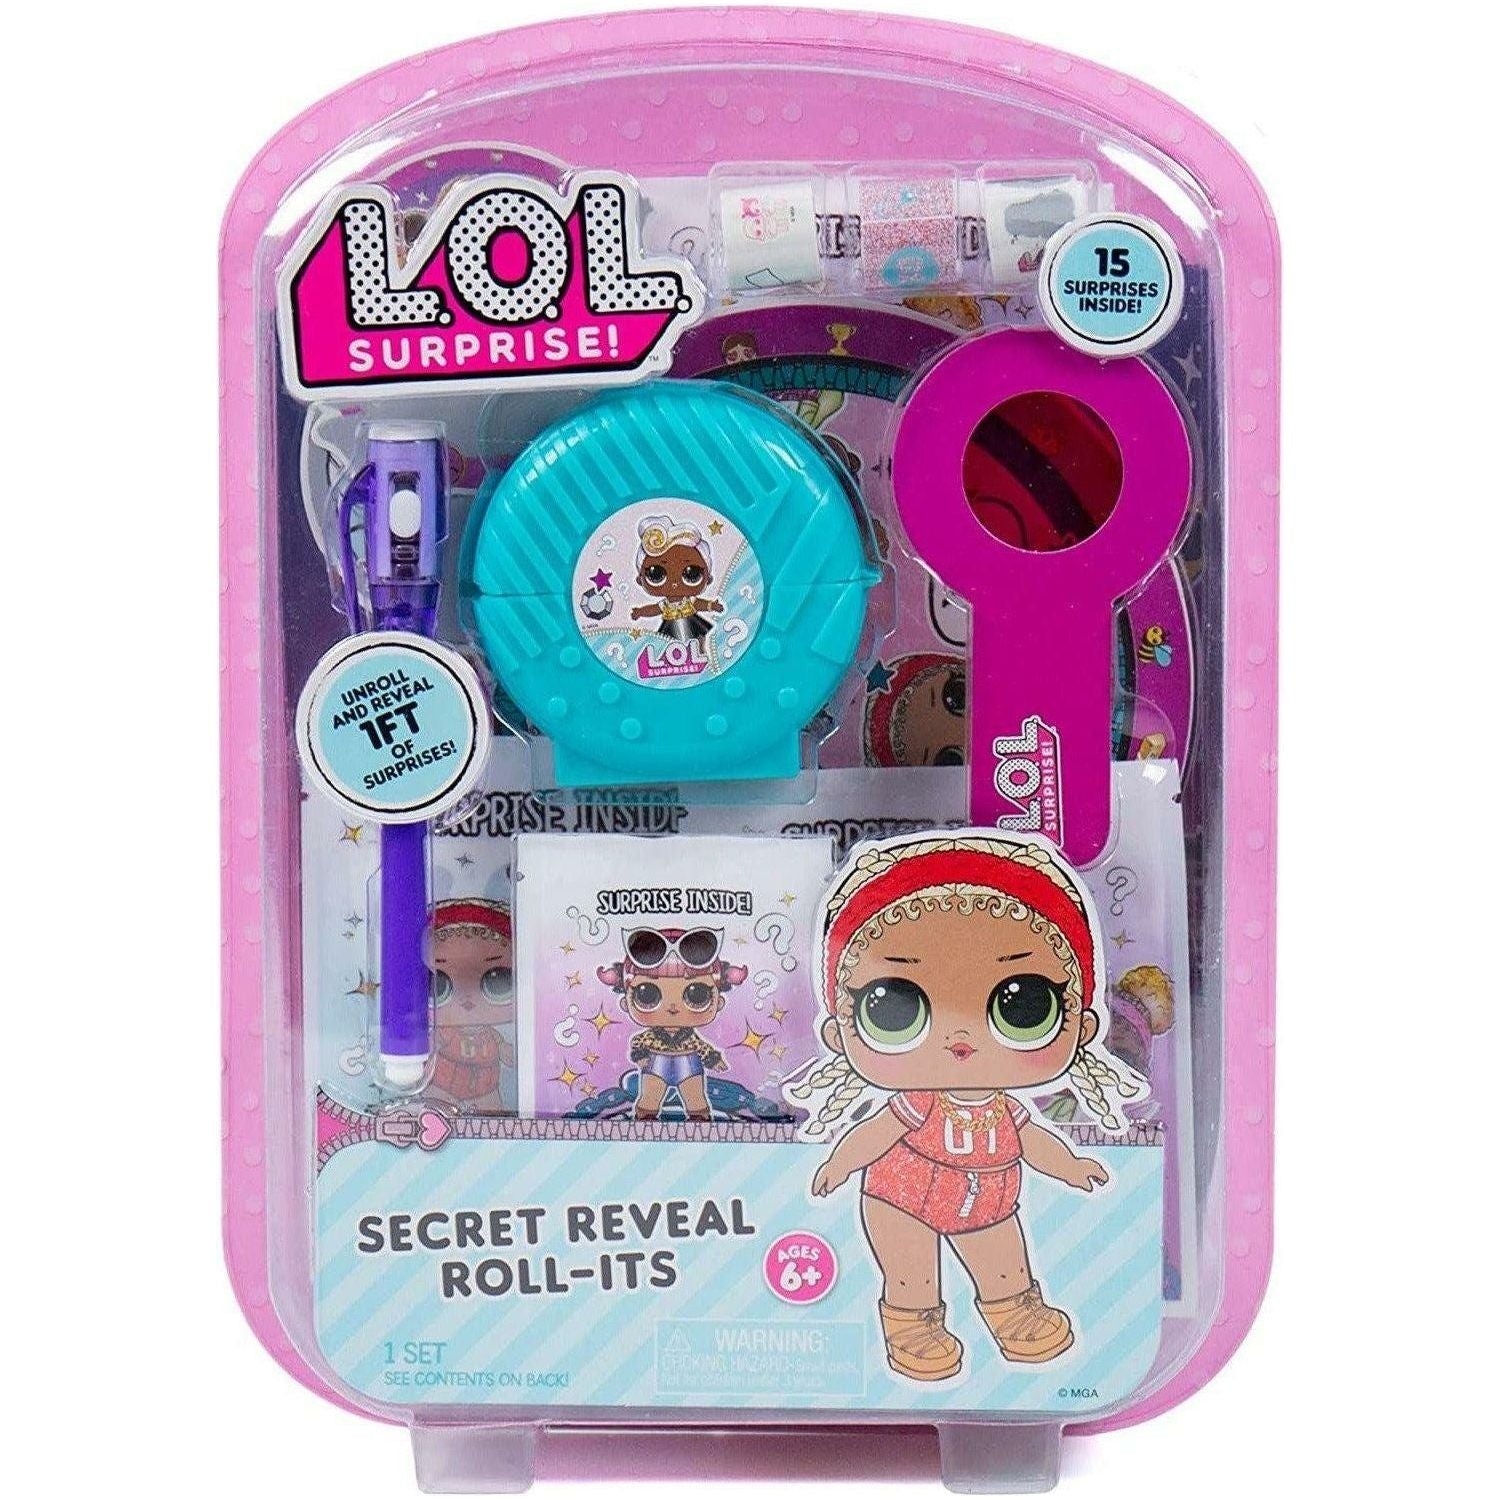 L.O.L Surprise Secret Reveal Roll-Its With 15 Surprises - BumbleToys - 5-7 Years, Amazon, Dolls, Fashion Dolls & Accessories, Girls, L.O.L